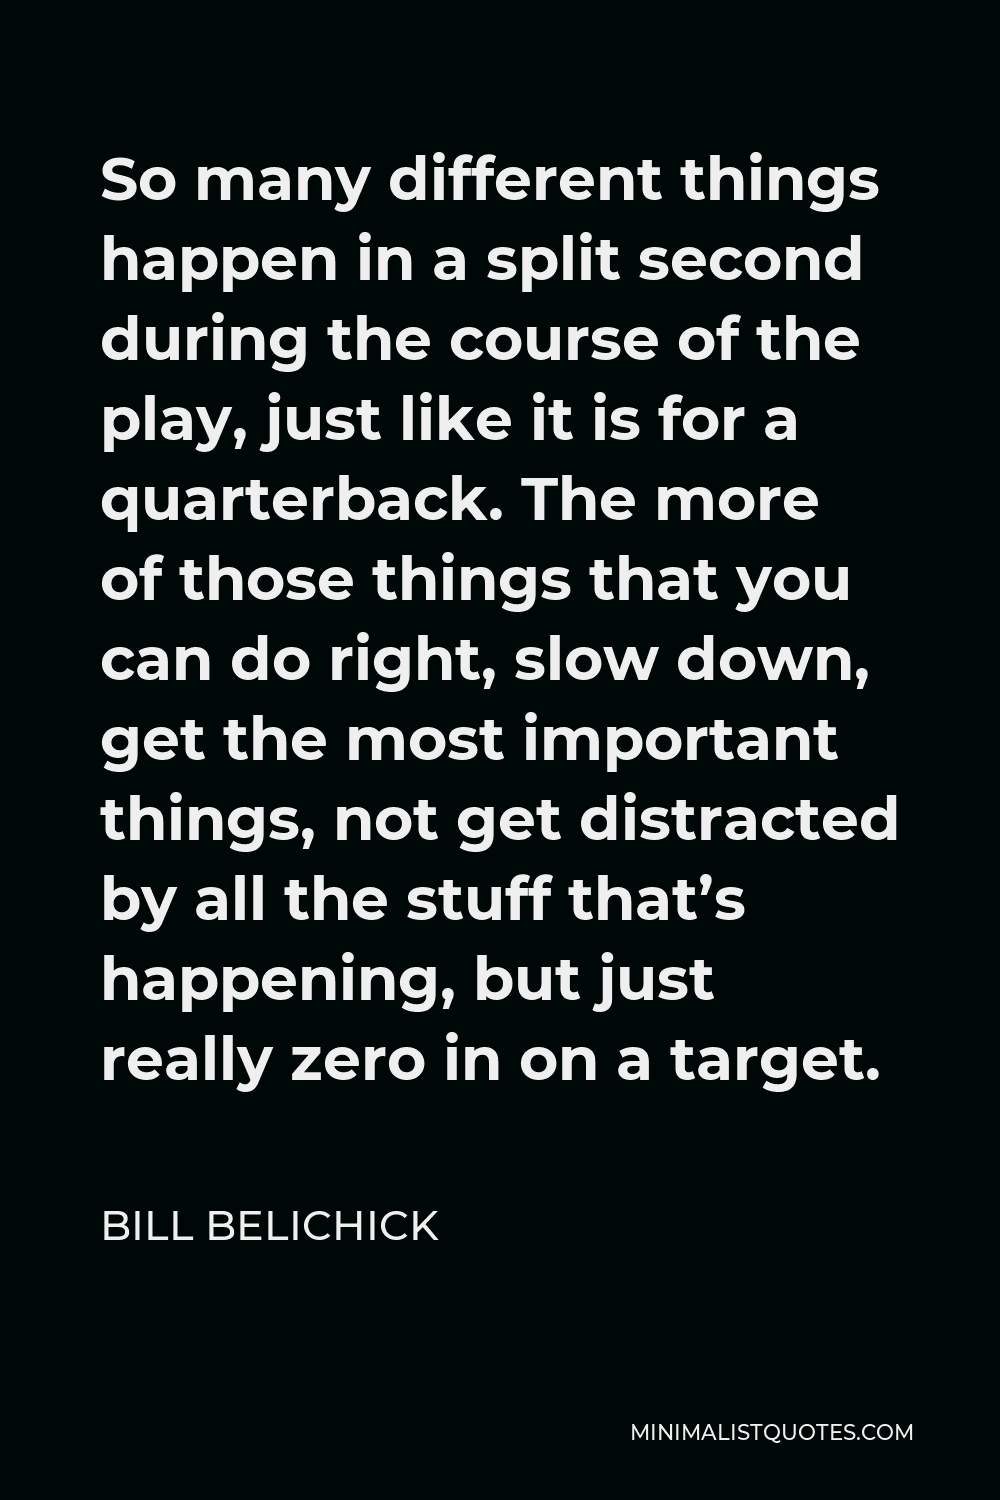 Bill Belichick Quote - So many different things happen in a split second during the course of the play, just like it is for a quarterback. The more of those things that you can do right, slow down, get the most important things, not get distracted by all the stuff that’s happening, but just really zero in on a target.